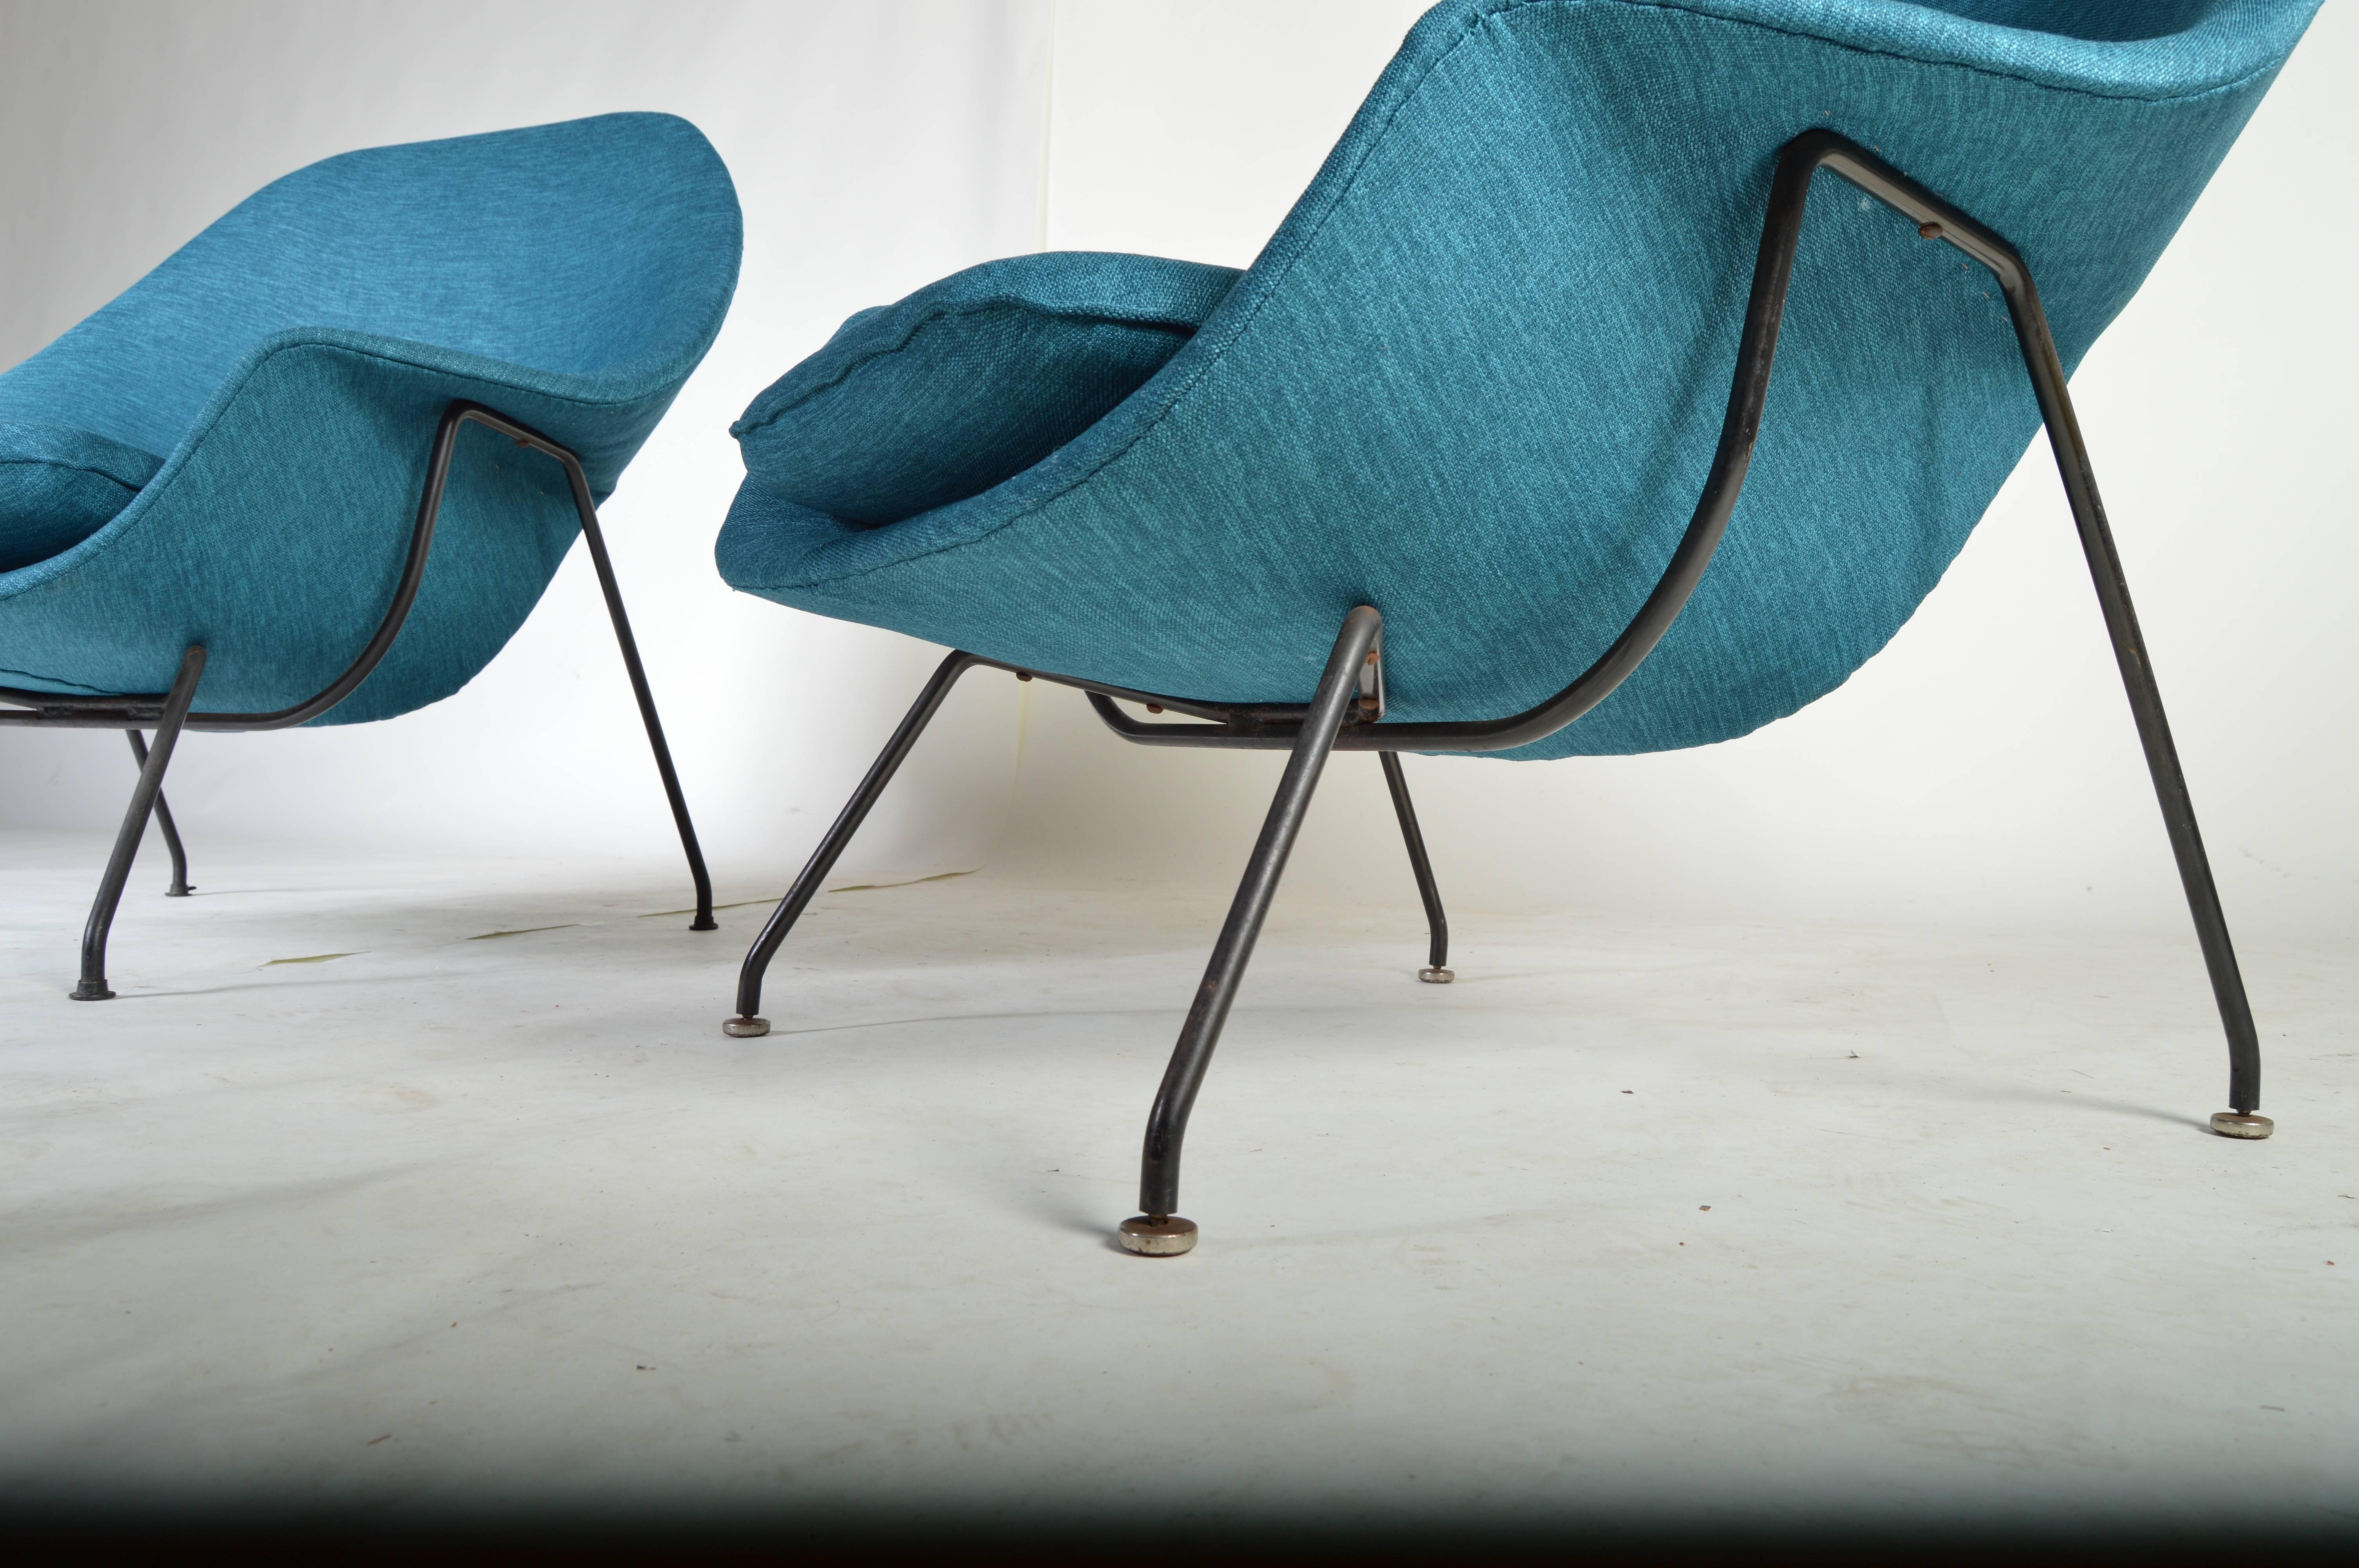 An early pair of original Eero Saarinen Womb chairs with single ottoman reupholstered in striking aqua blue tweed. New foam and new fabric. Cushions are overstuffed for the buyers pleasure of breaking them in. 

Ottoman dimensions: 15